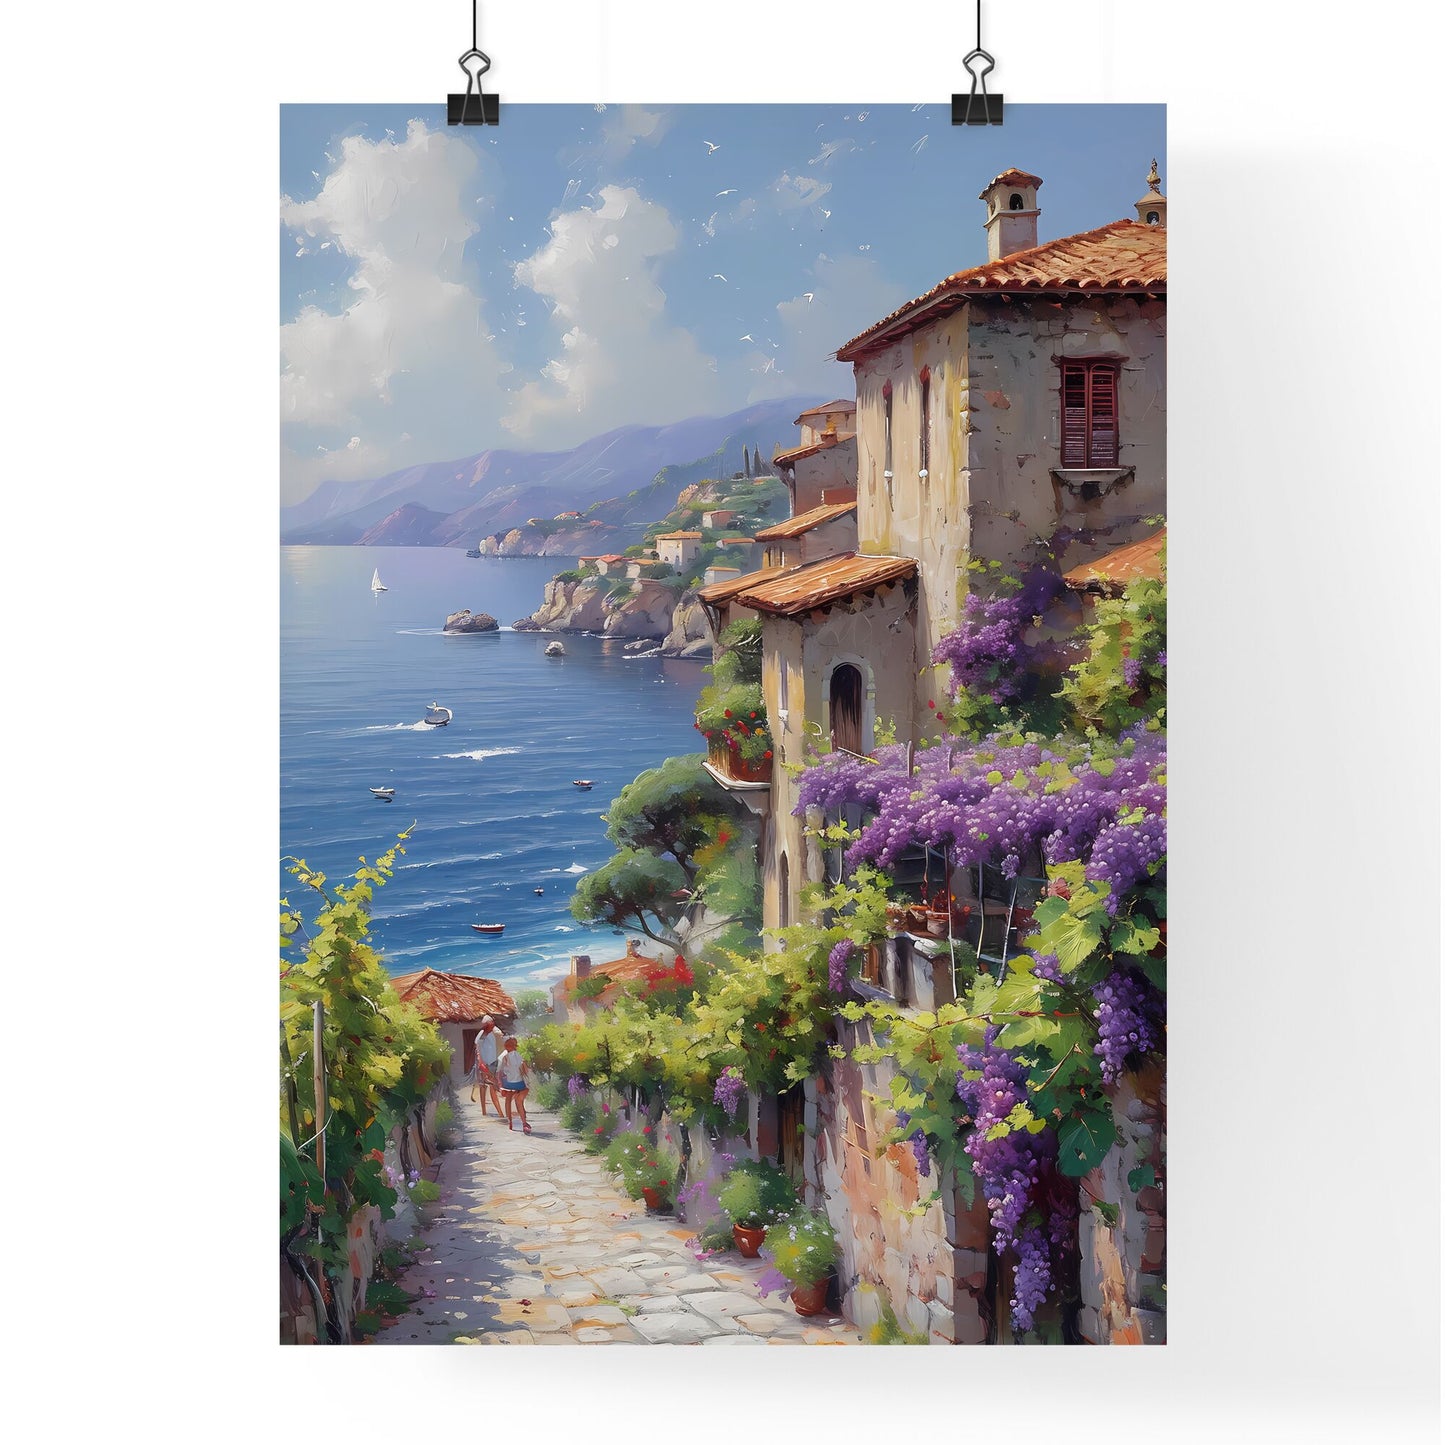 A picture of a Sicilian vineyard - Art print of a painting of a town by the sea Default Title